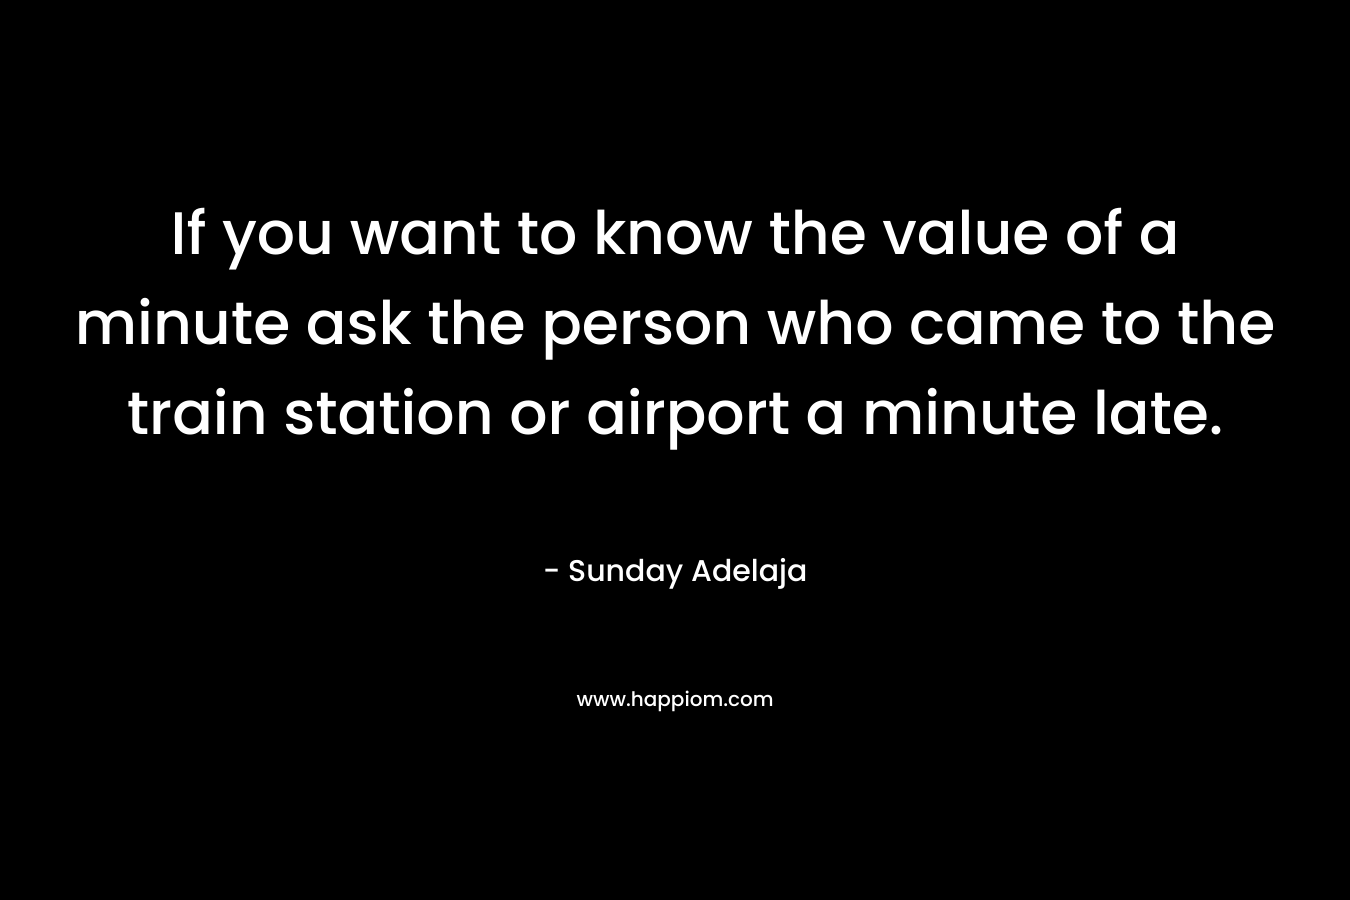 If you want to know the value of a minute ask the person who came to the train station or airport a minute late.